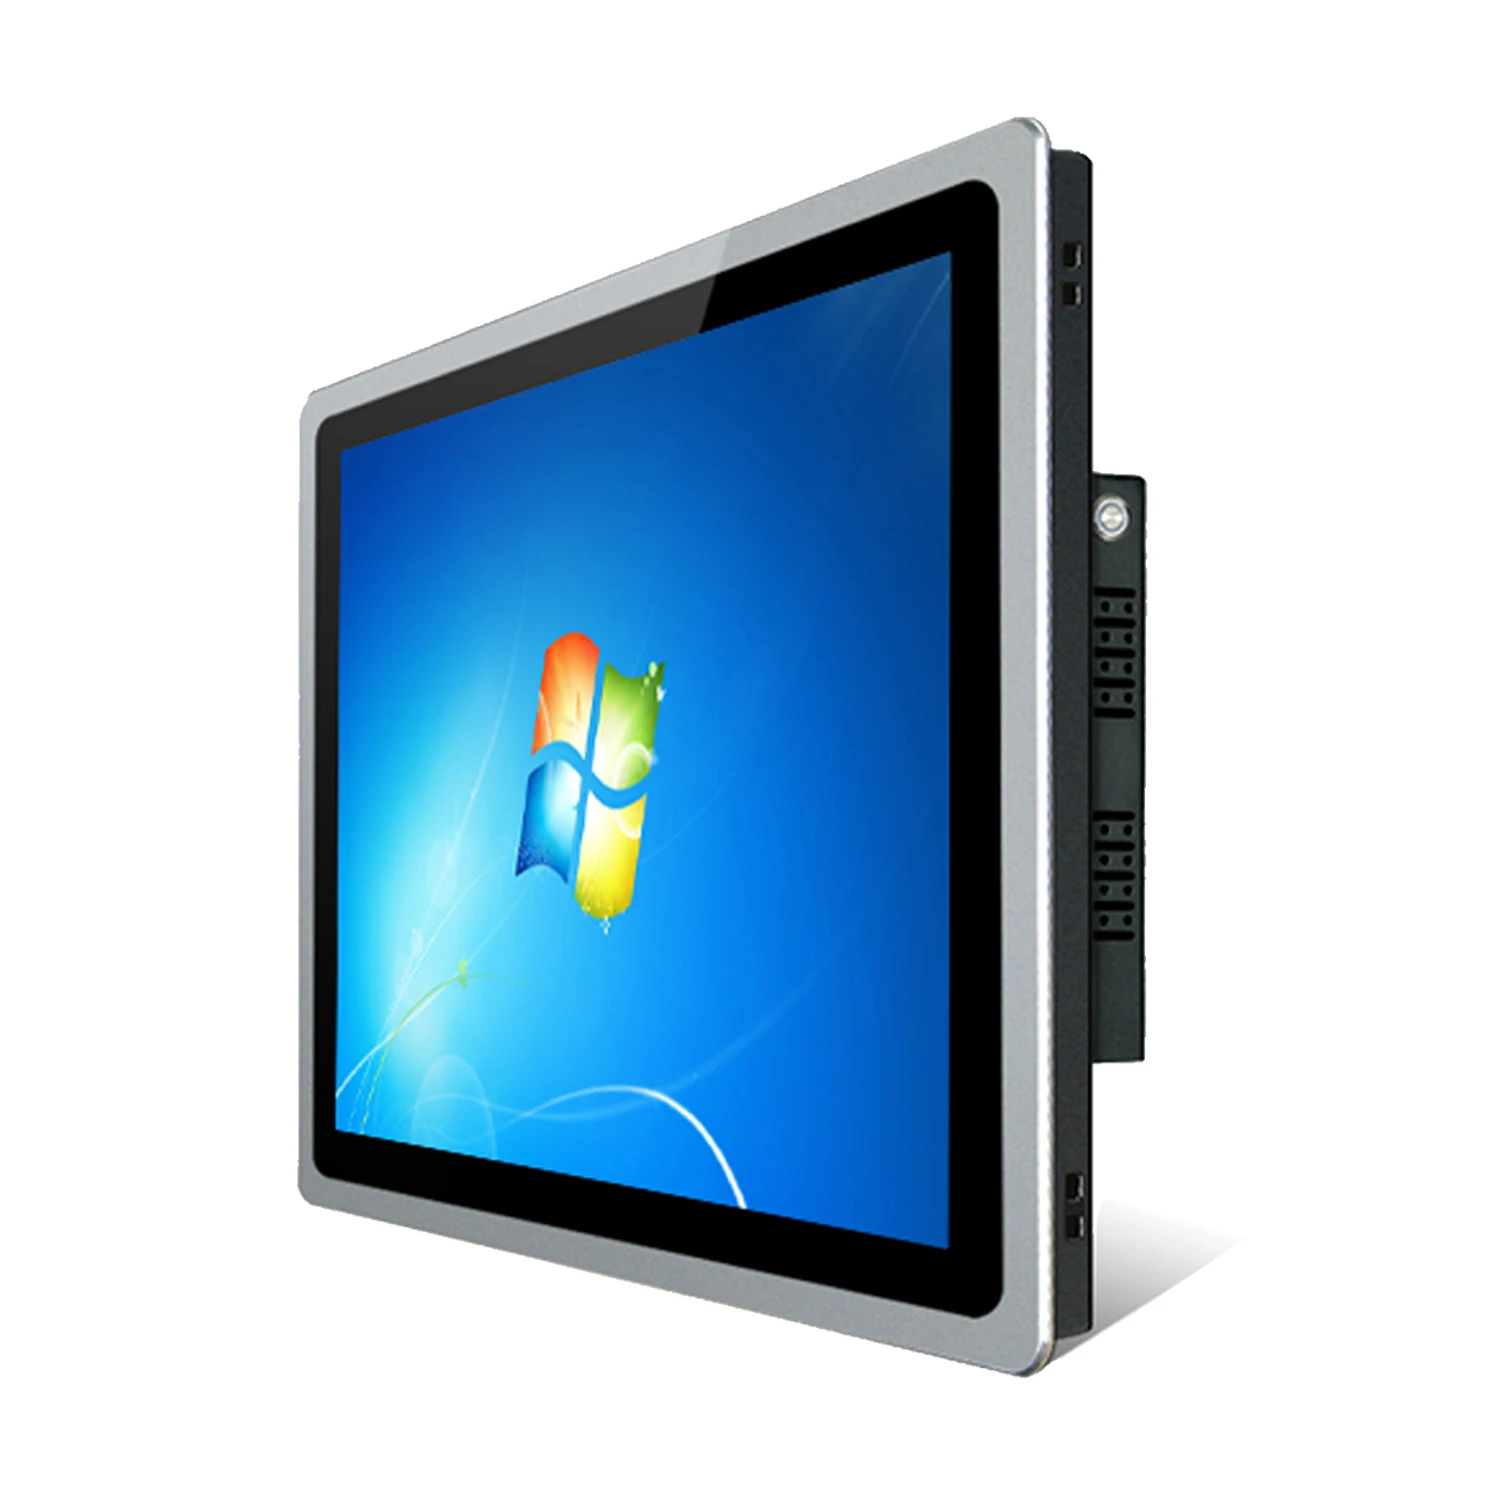 19 inch Panel pc with Capacitive Screen Windows 8G RAM 64G SSD Wifi Com Mini all-in-one PC Embedded 17